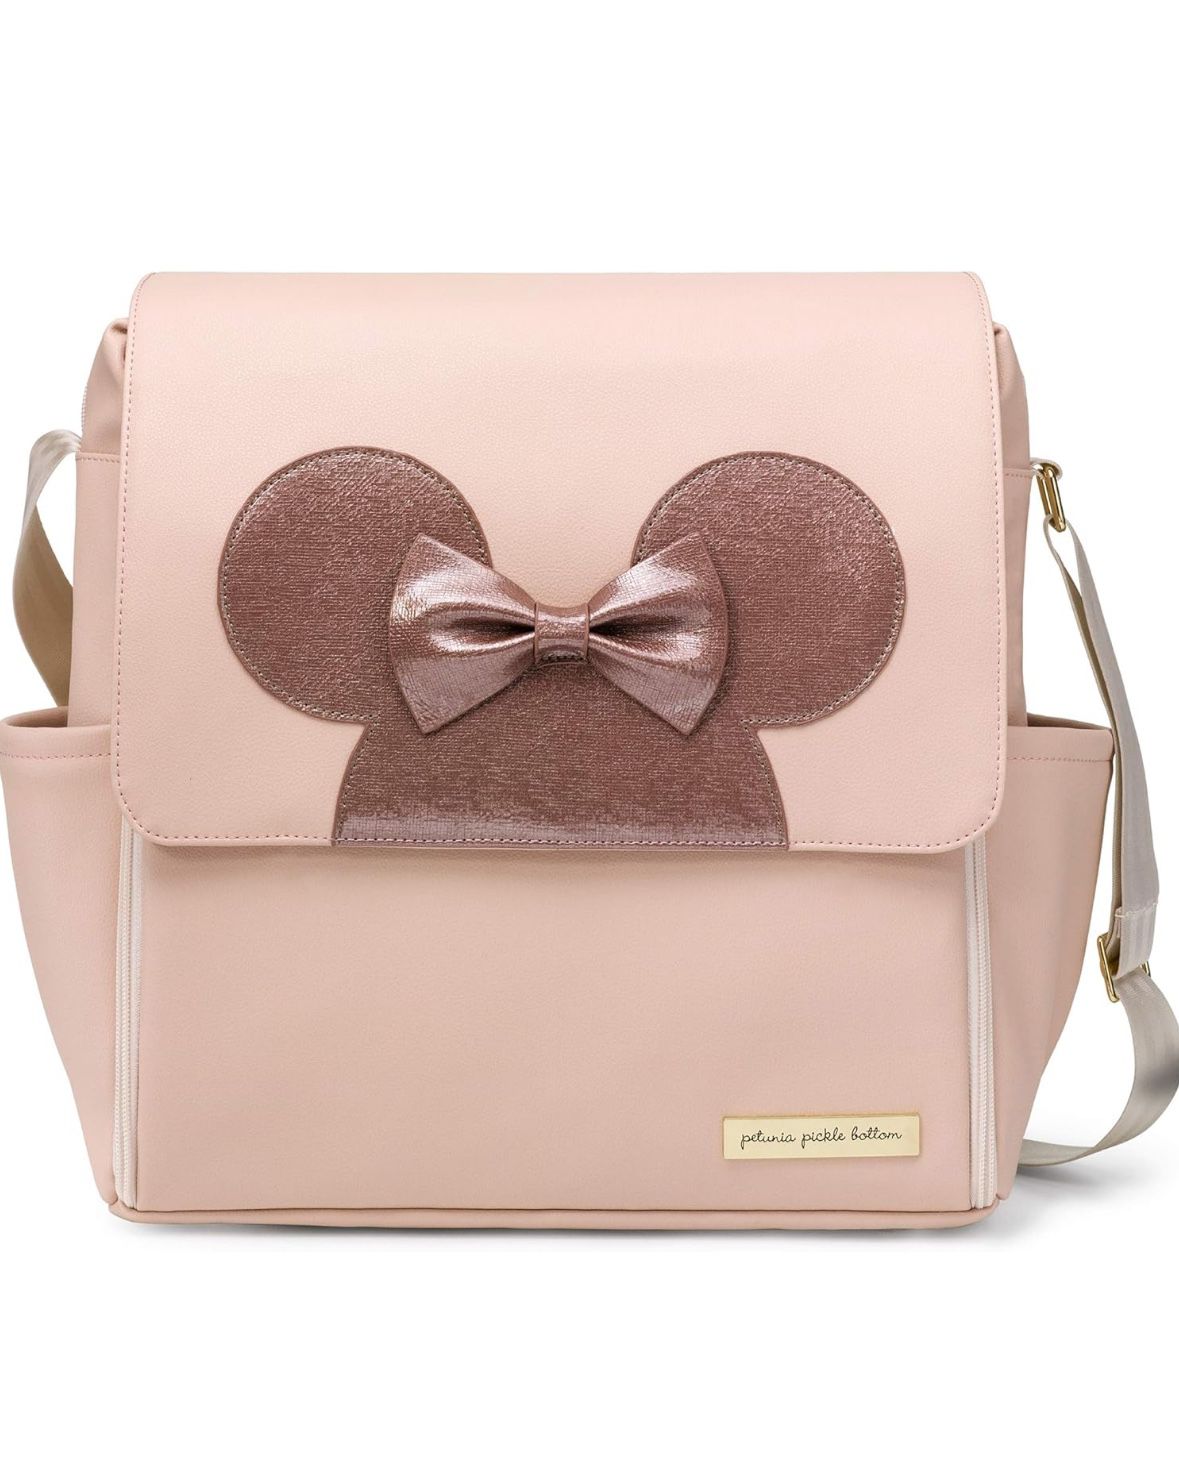 Petunia Pickle Bottom - Boxy Backpack - Pink Minnie Mouse